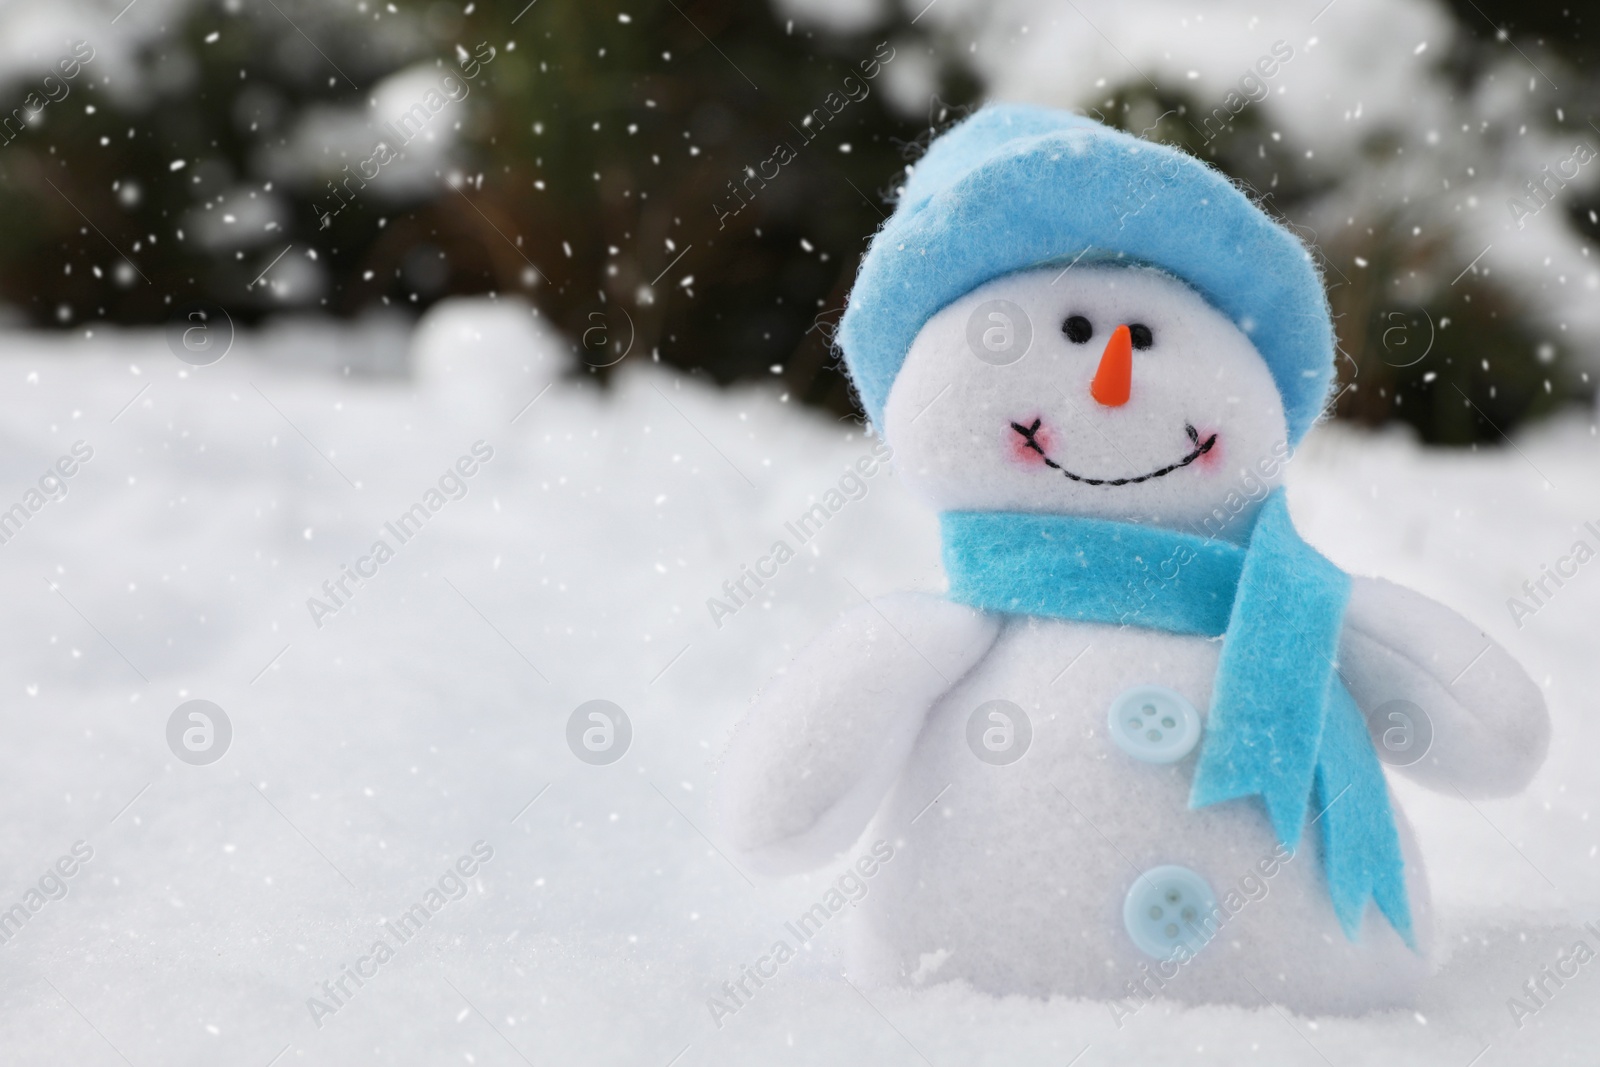 Photo of Cute small snowman toy on snow outdoors, space for text